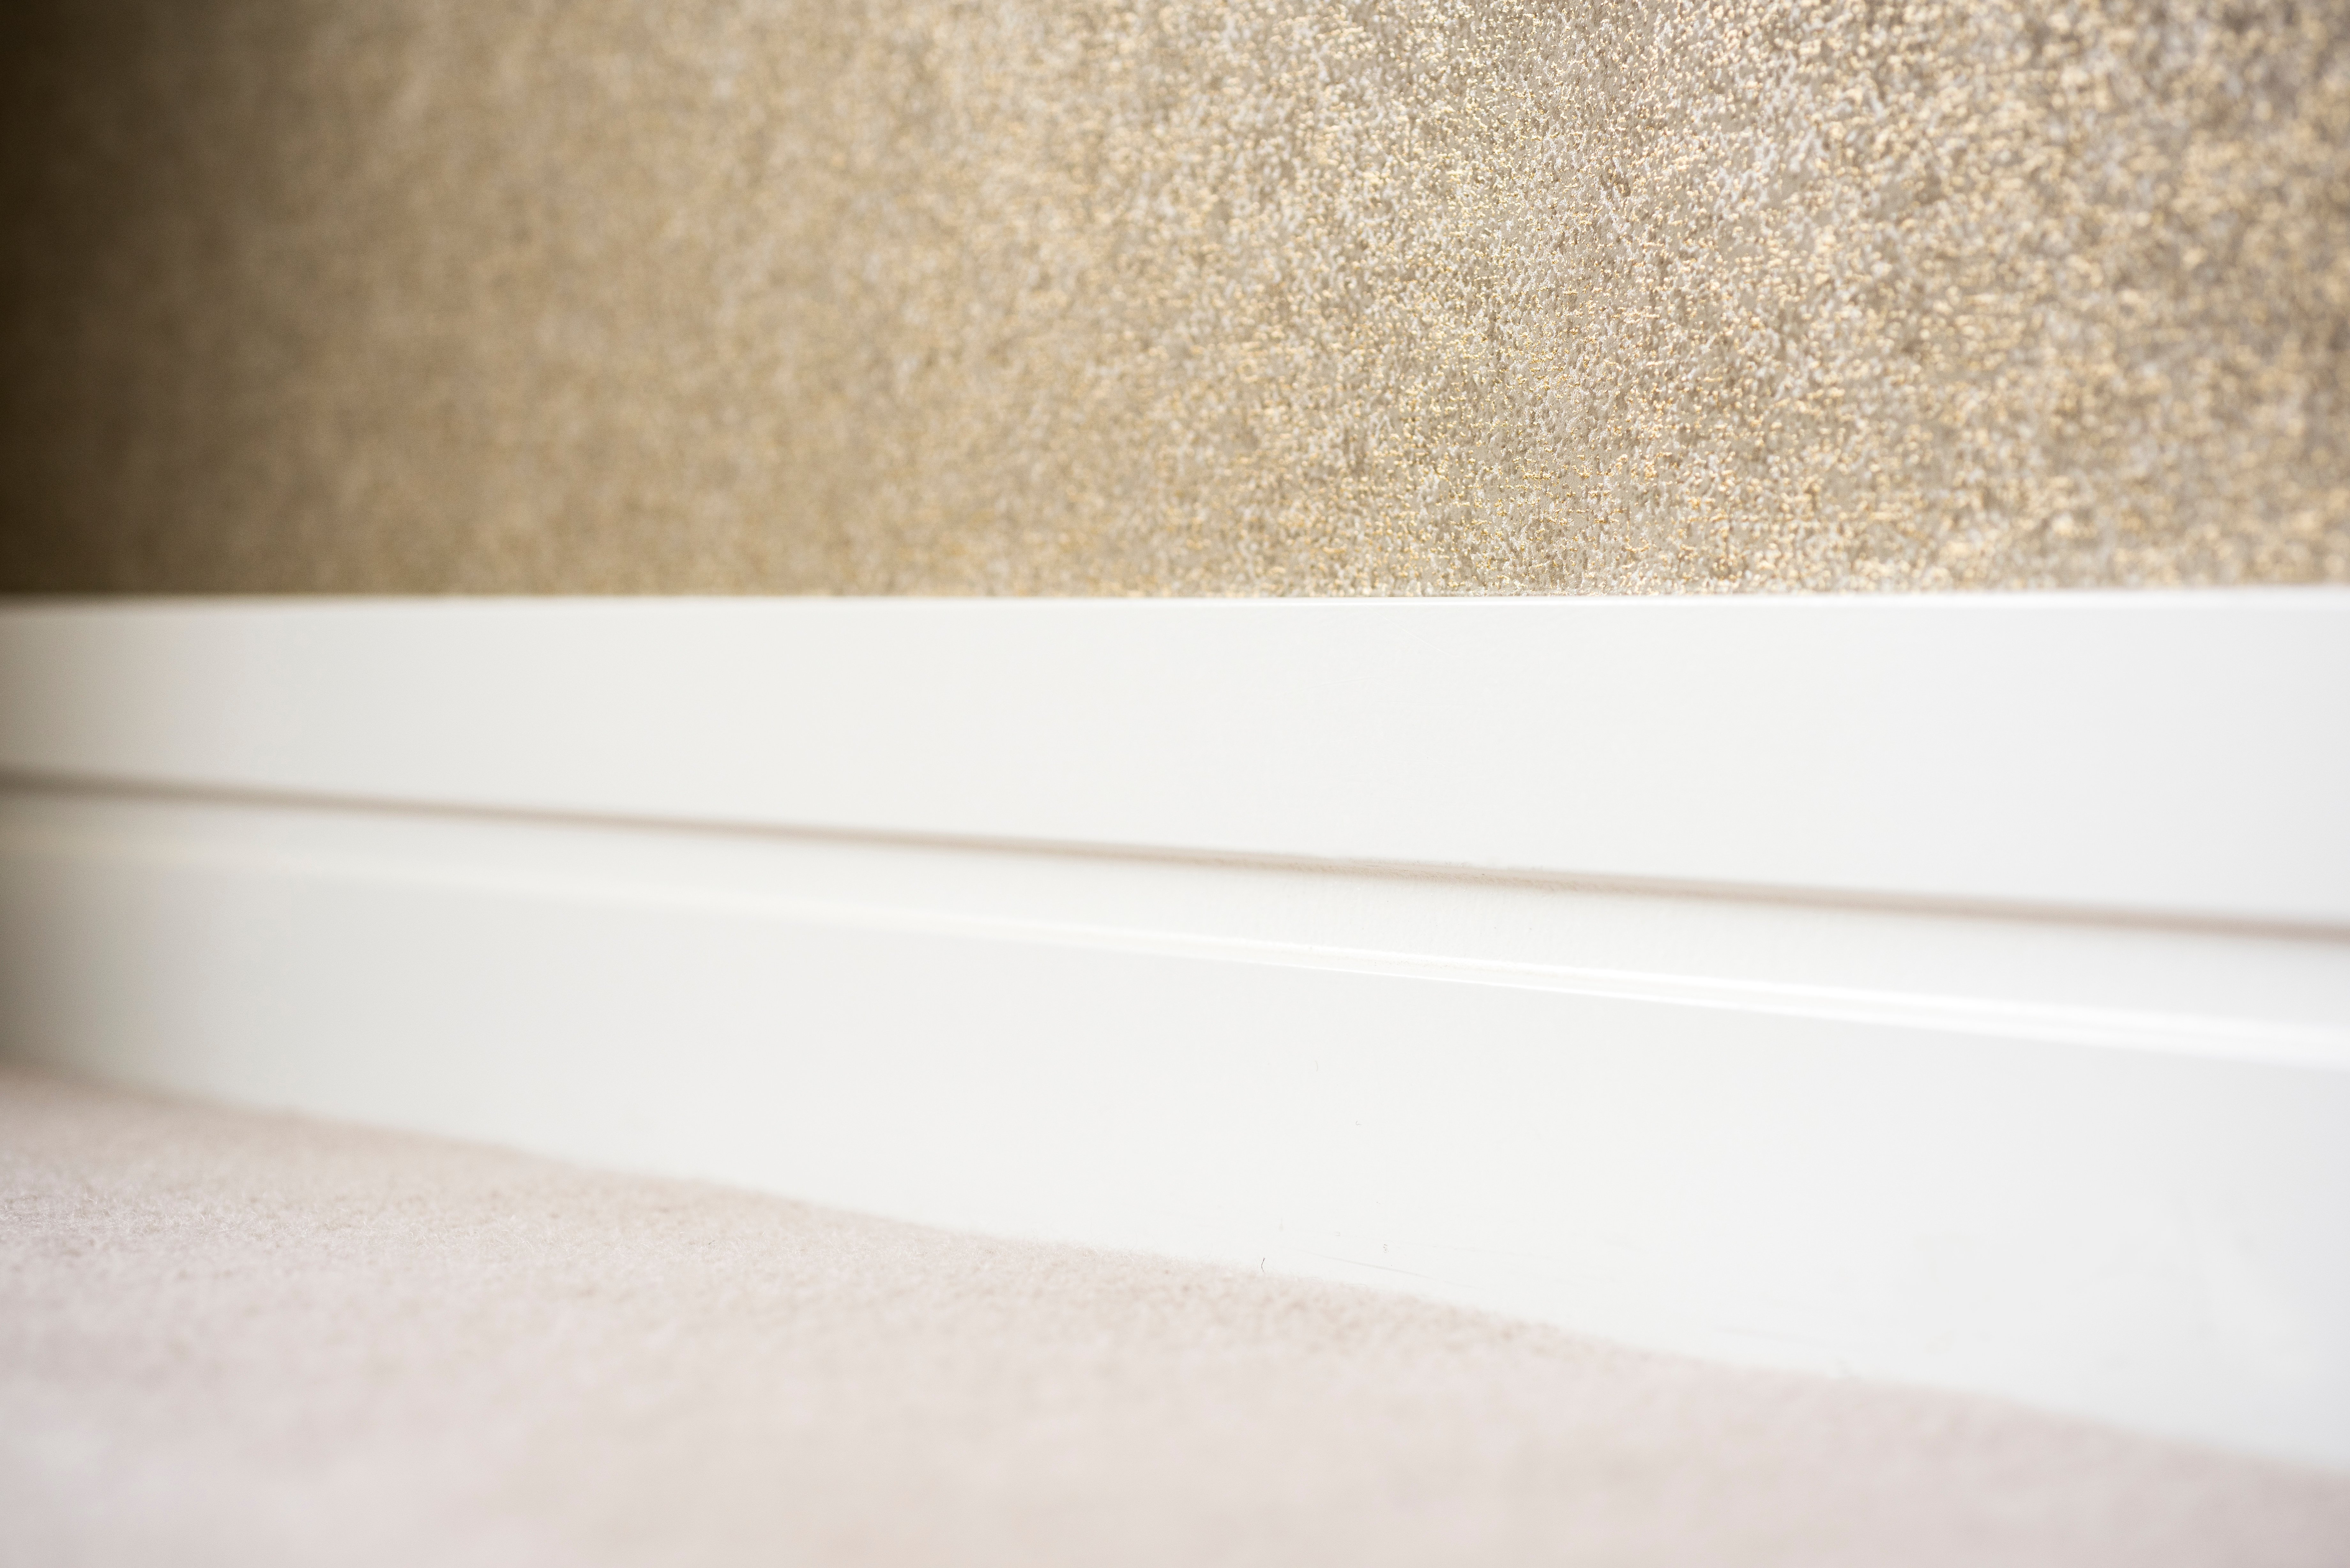 How to paint skirting board3